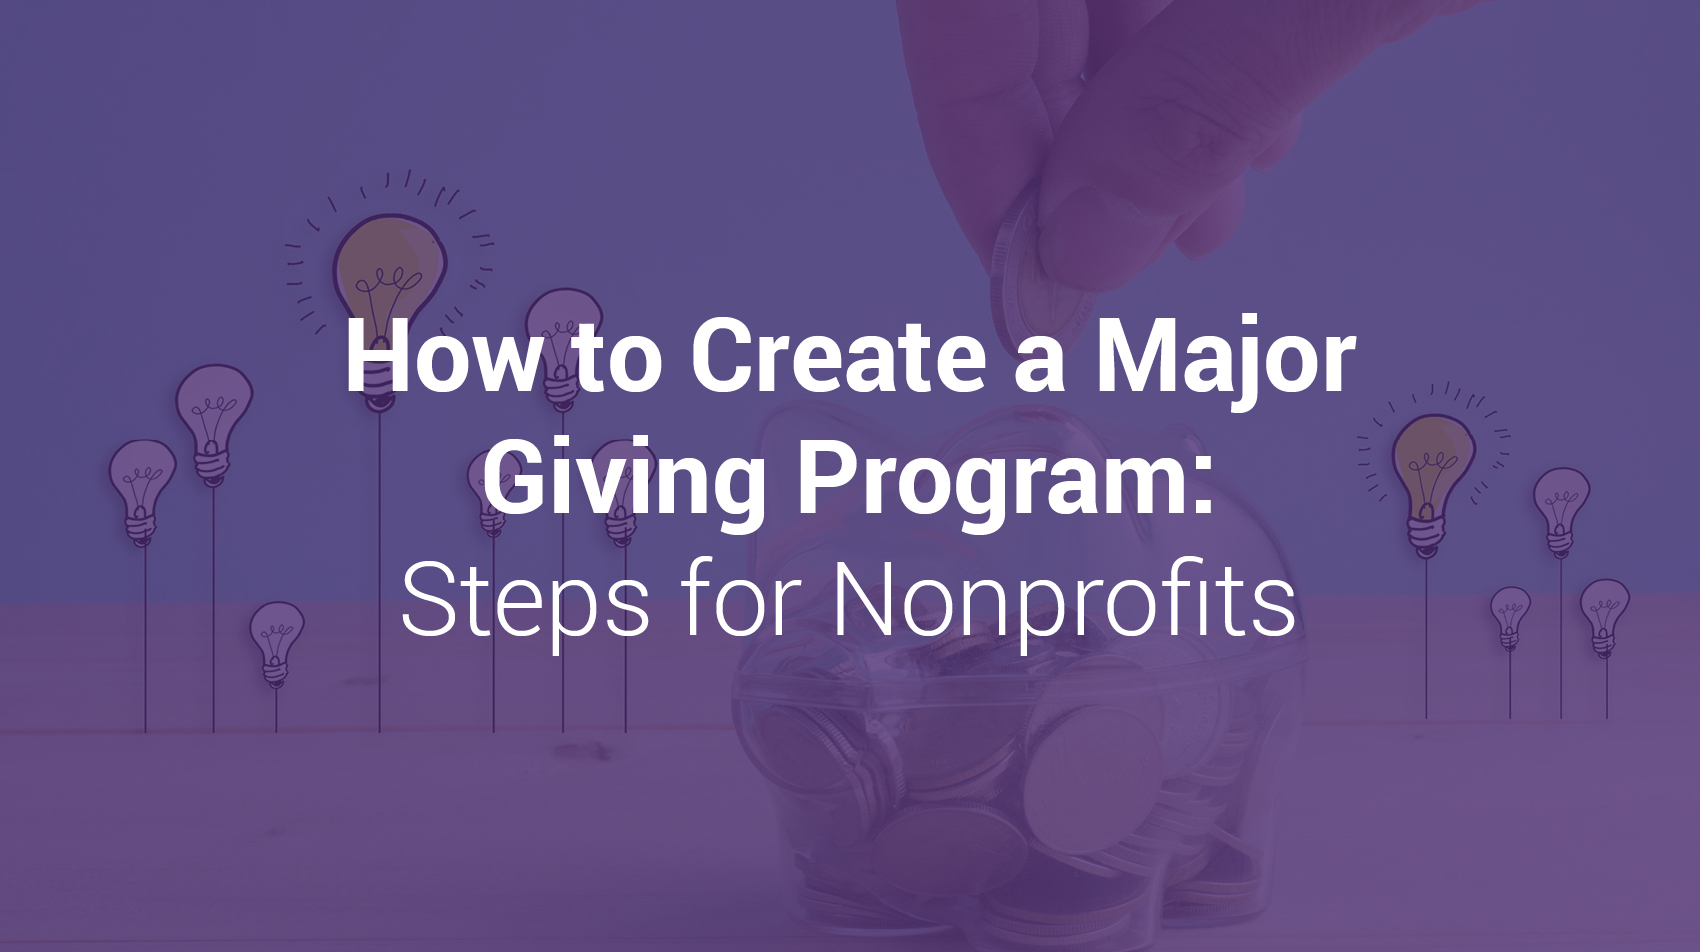 The title of the article, which is “How to Create a Major Giving Program: Steps for Nonprofits,” over an image representing nonprofit donations.